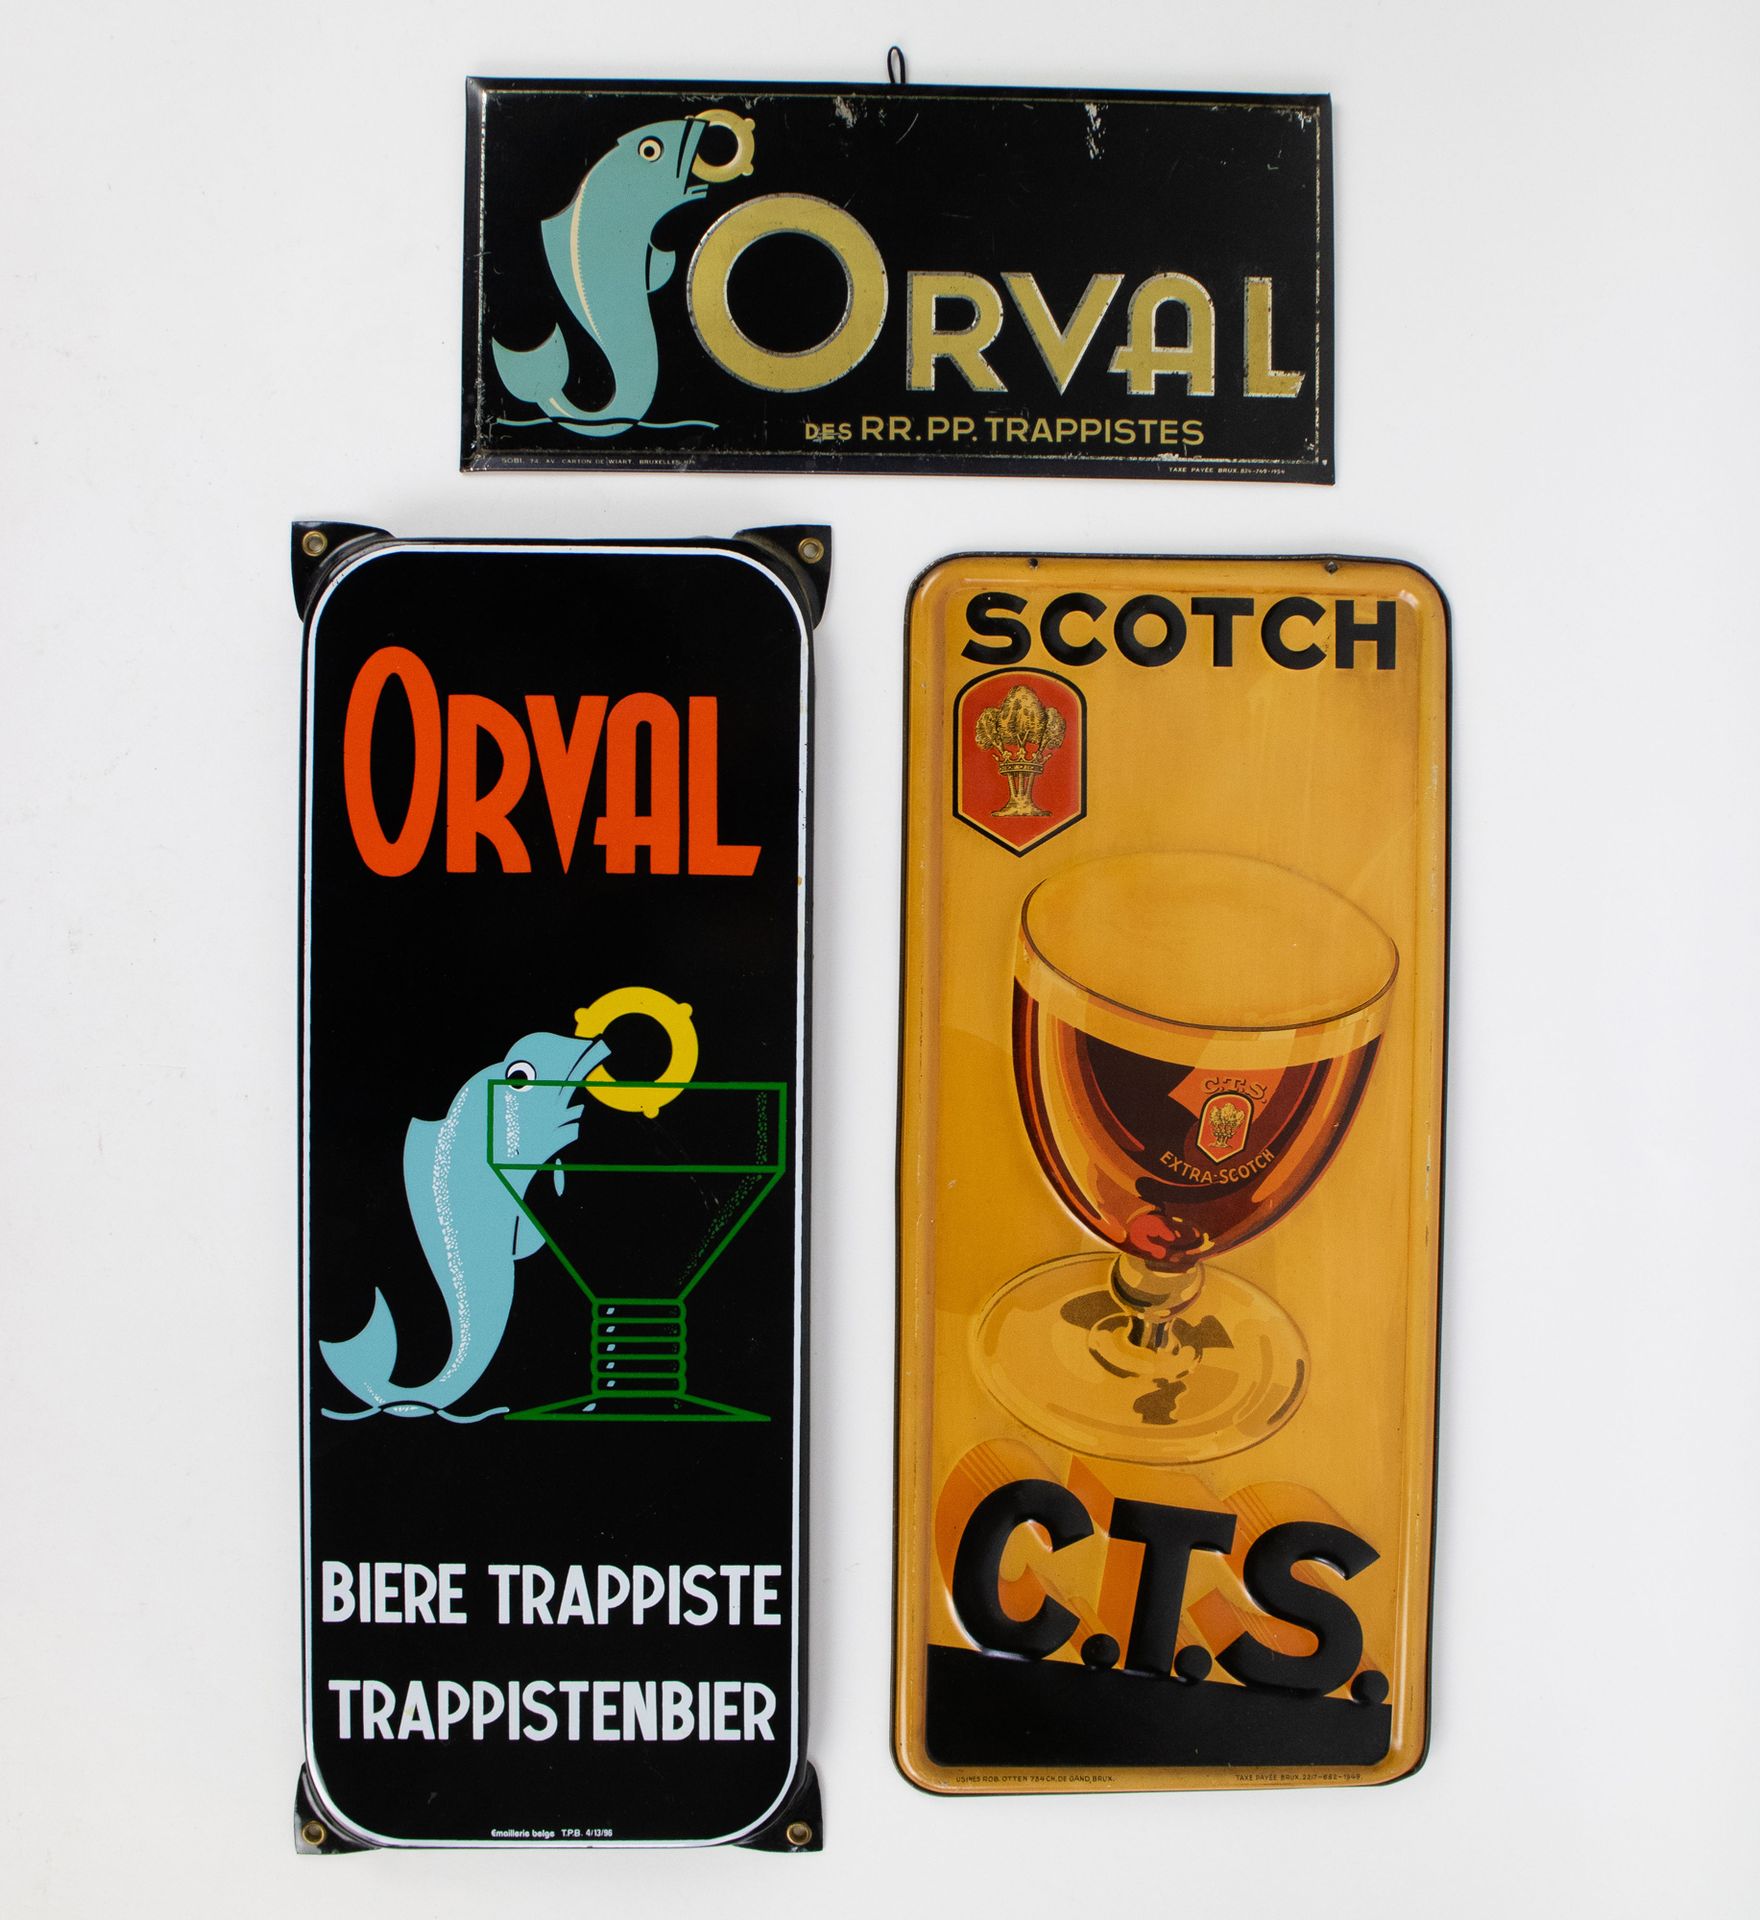 Null 金属Orval 1954, Scotch C.T.S. 1949 and Enamel ORVAL trappistenbier
Metal Orva&hellip;